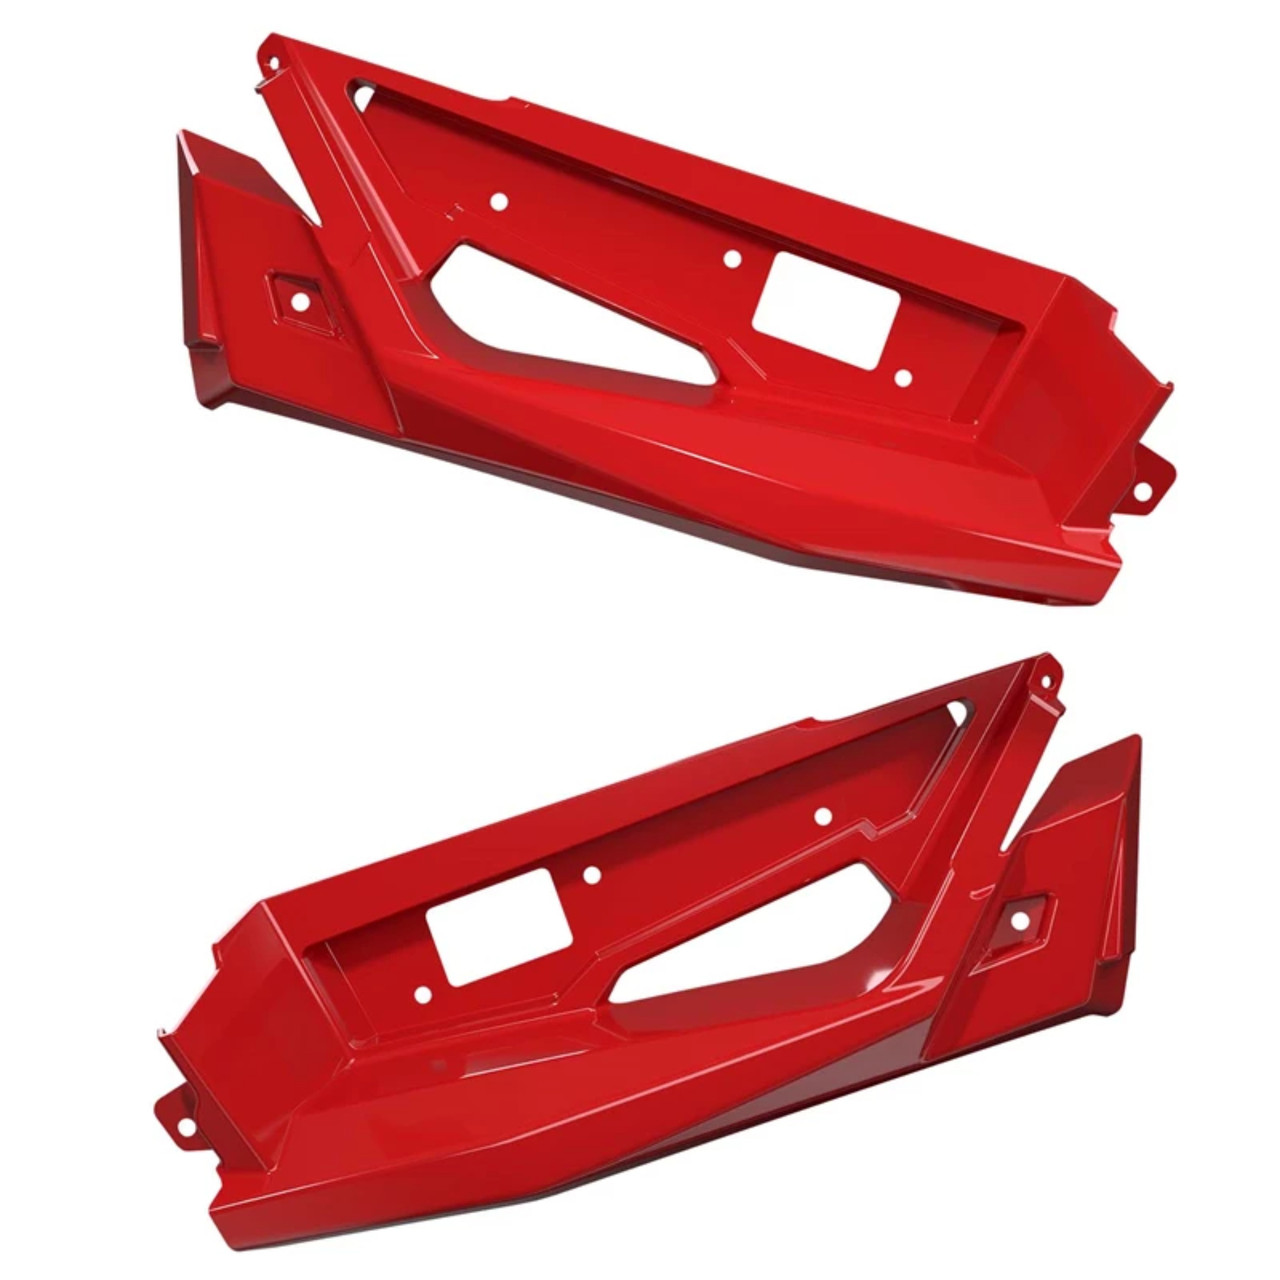 Polaris New OEM Slingshot Red Painted Front Upper Accent Panel, 2884604-292